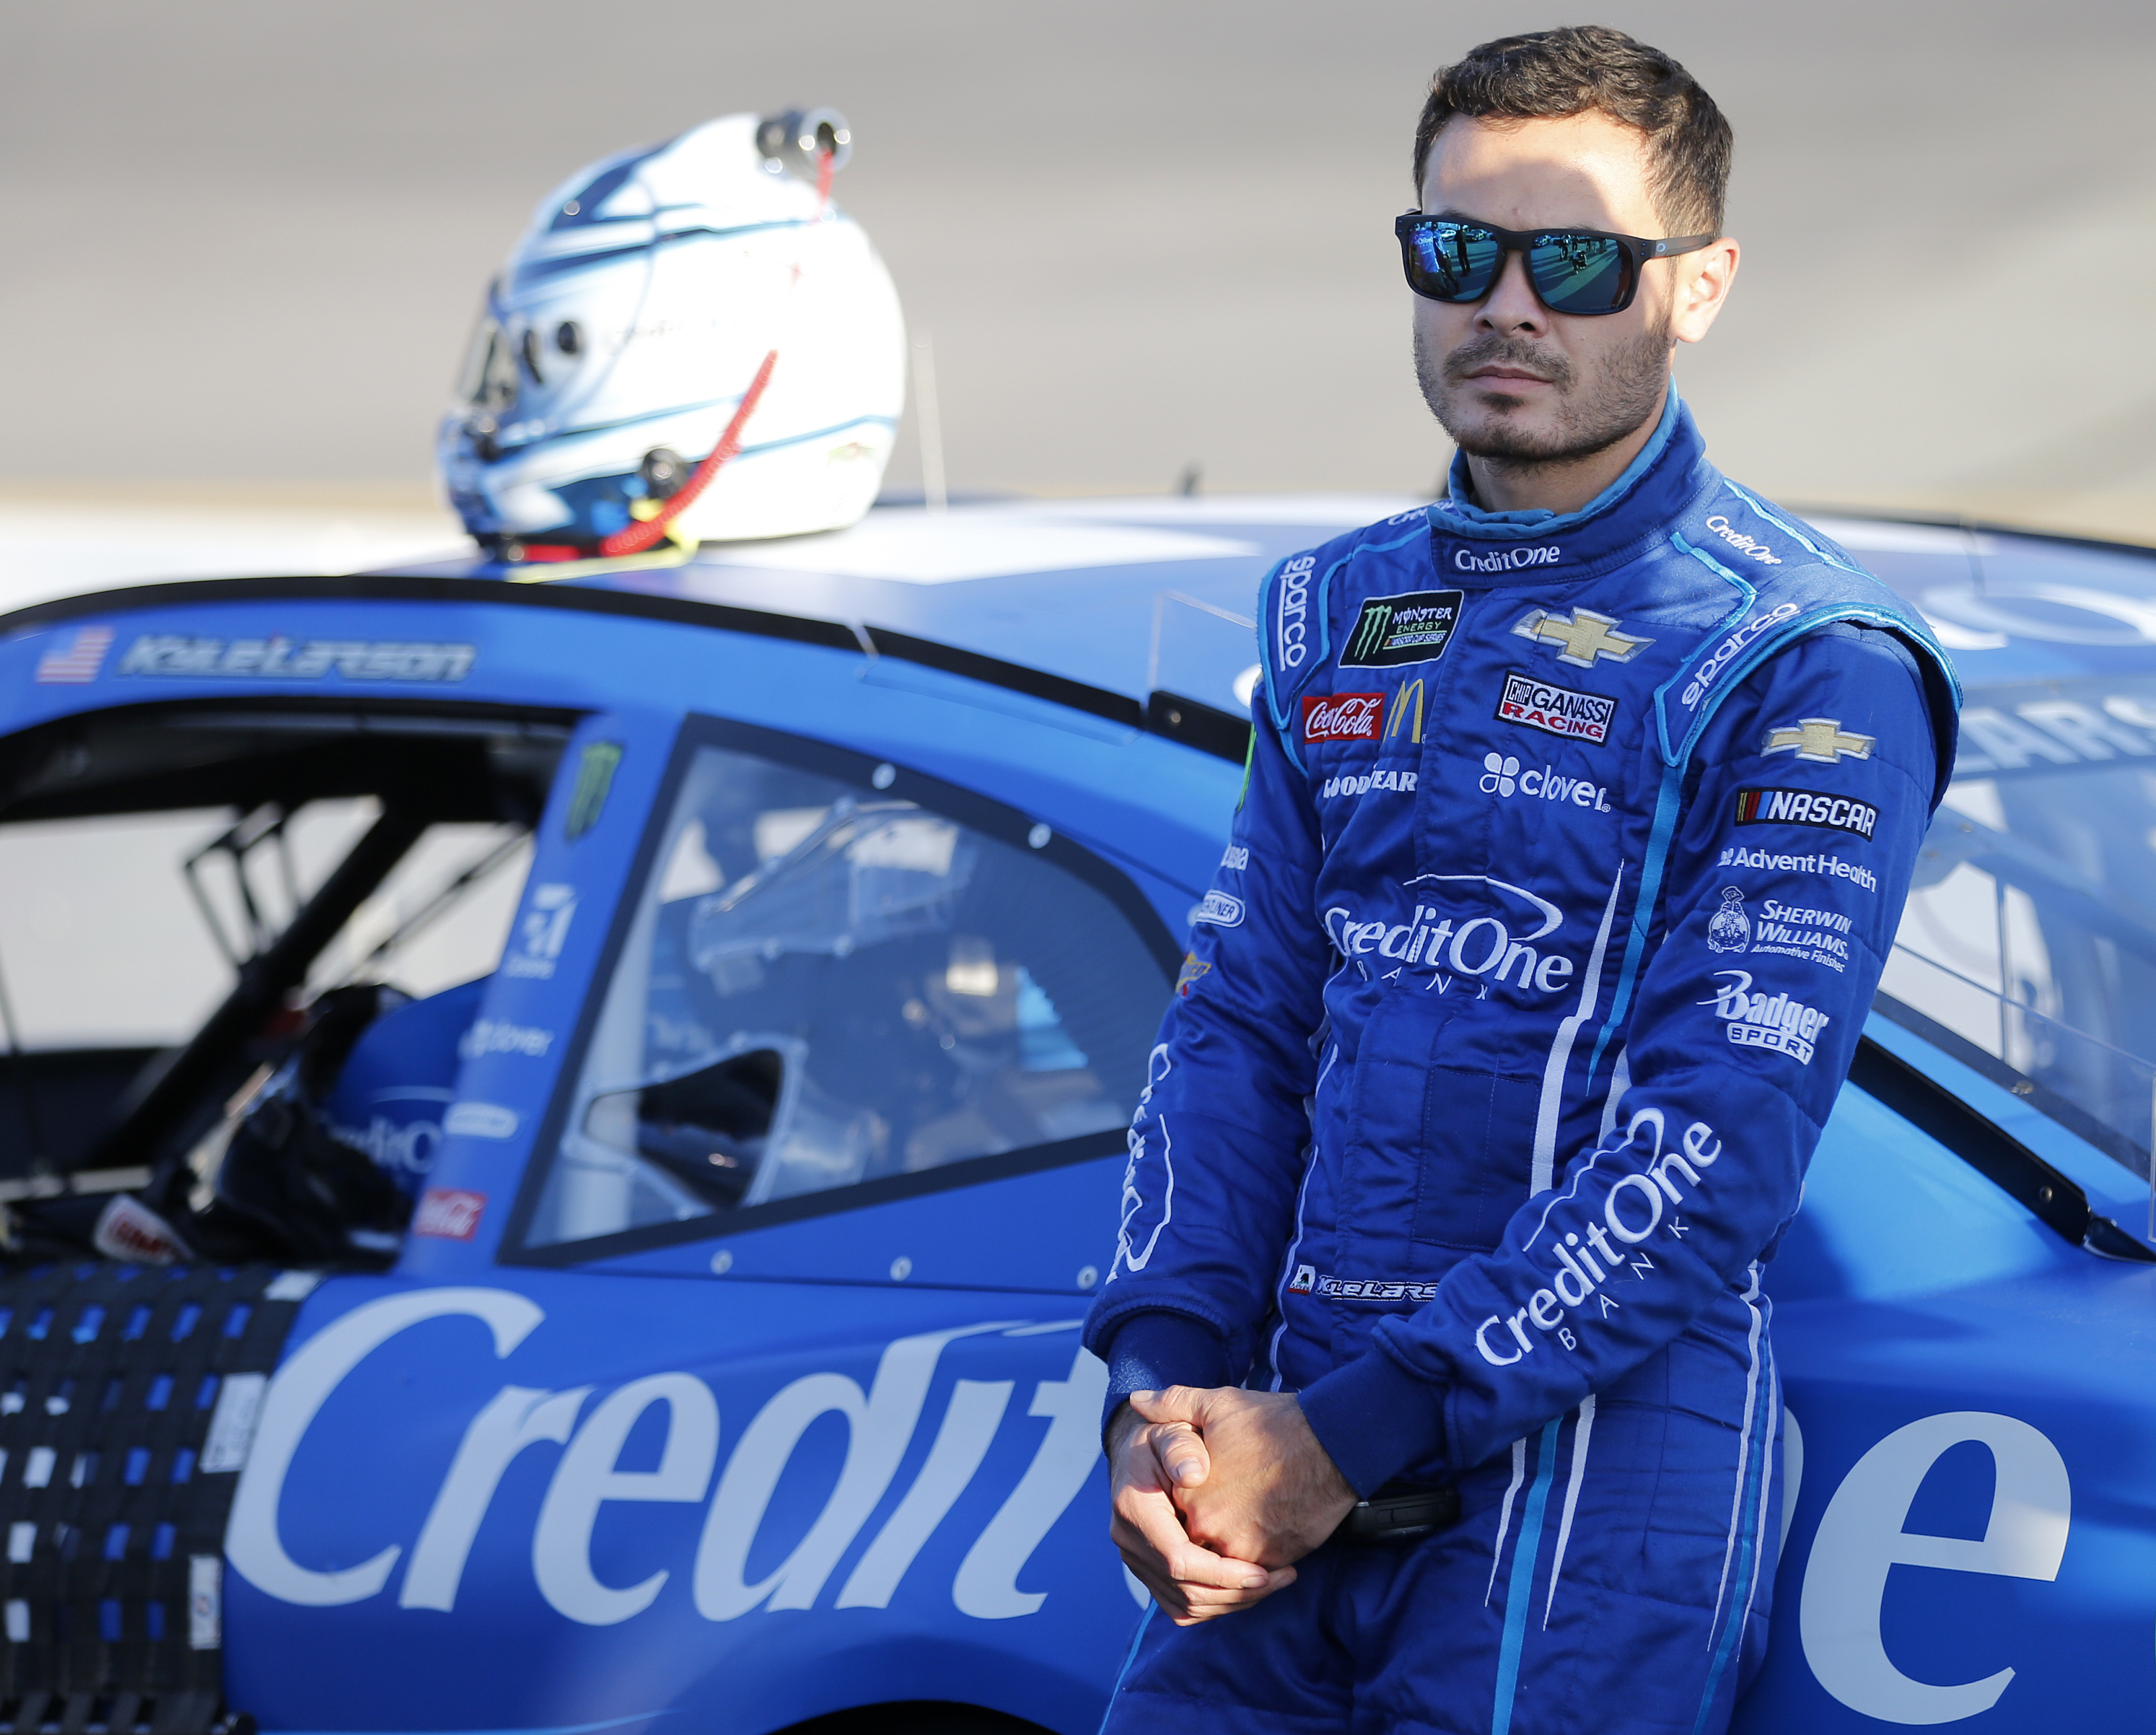 NASCAR driver Kyle Larson compared to controversial NFL star